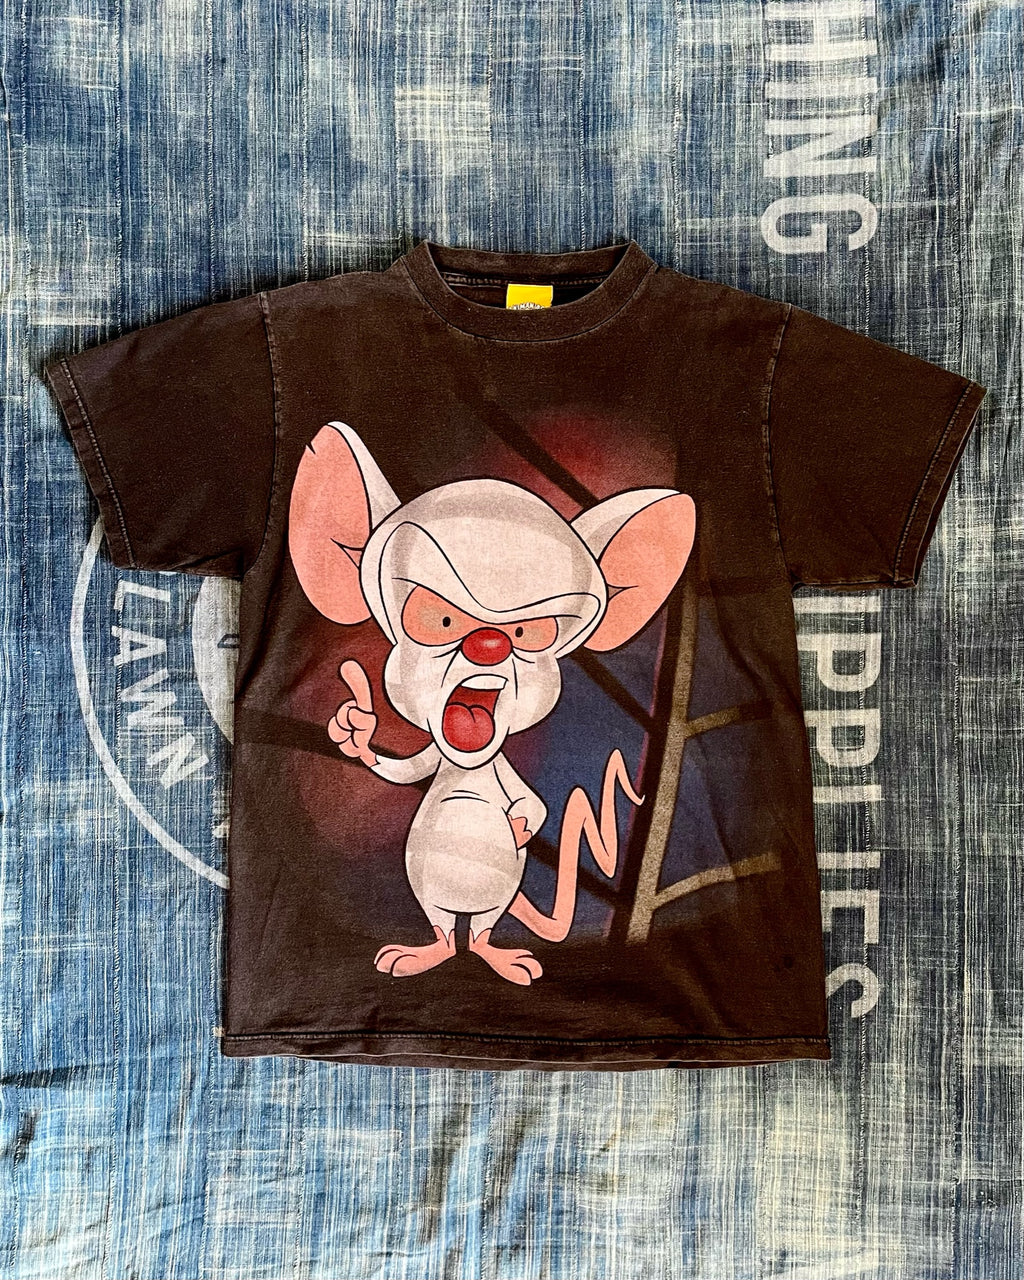 Vintage 1990s Pinky and The Brain T-shirt